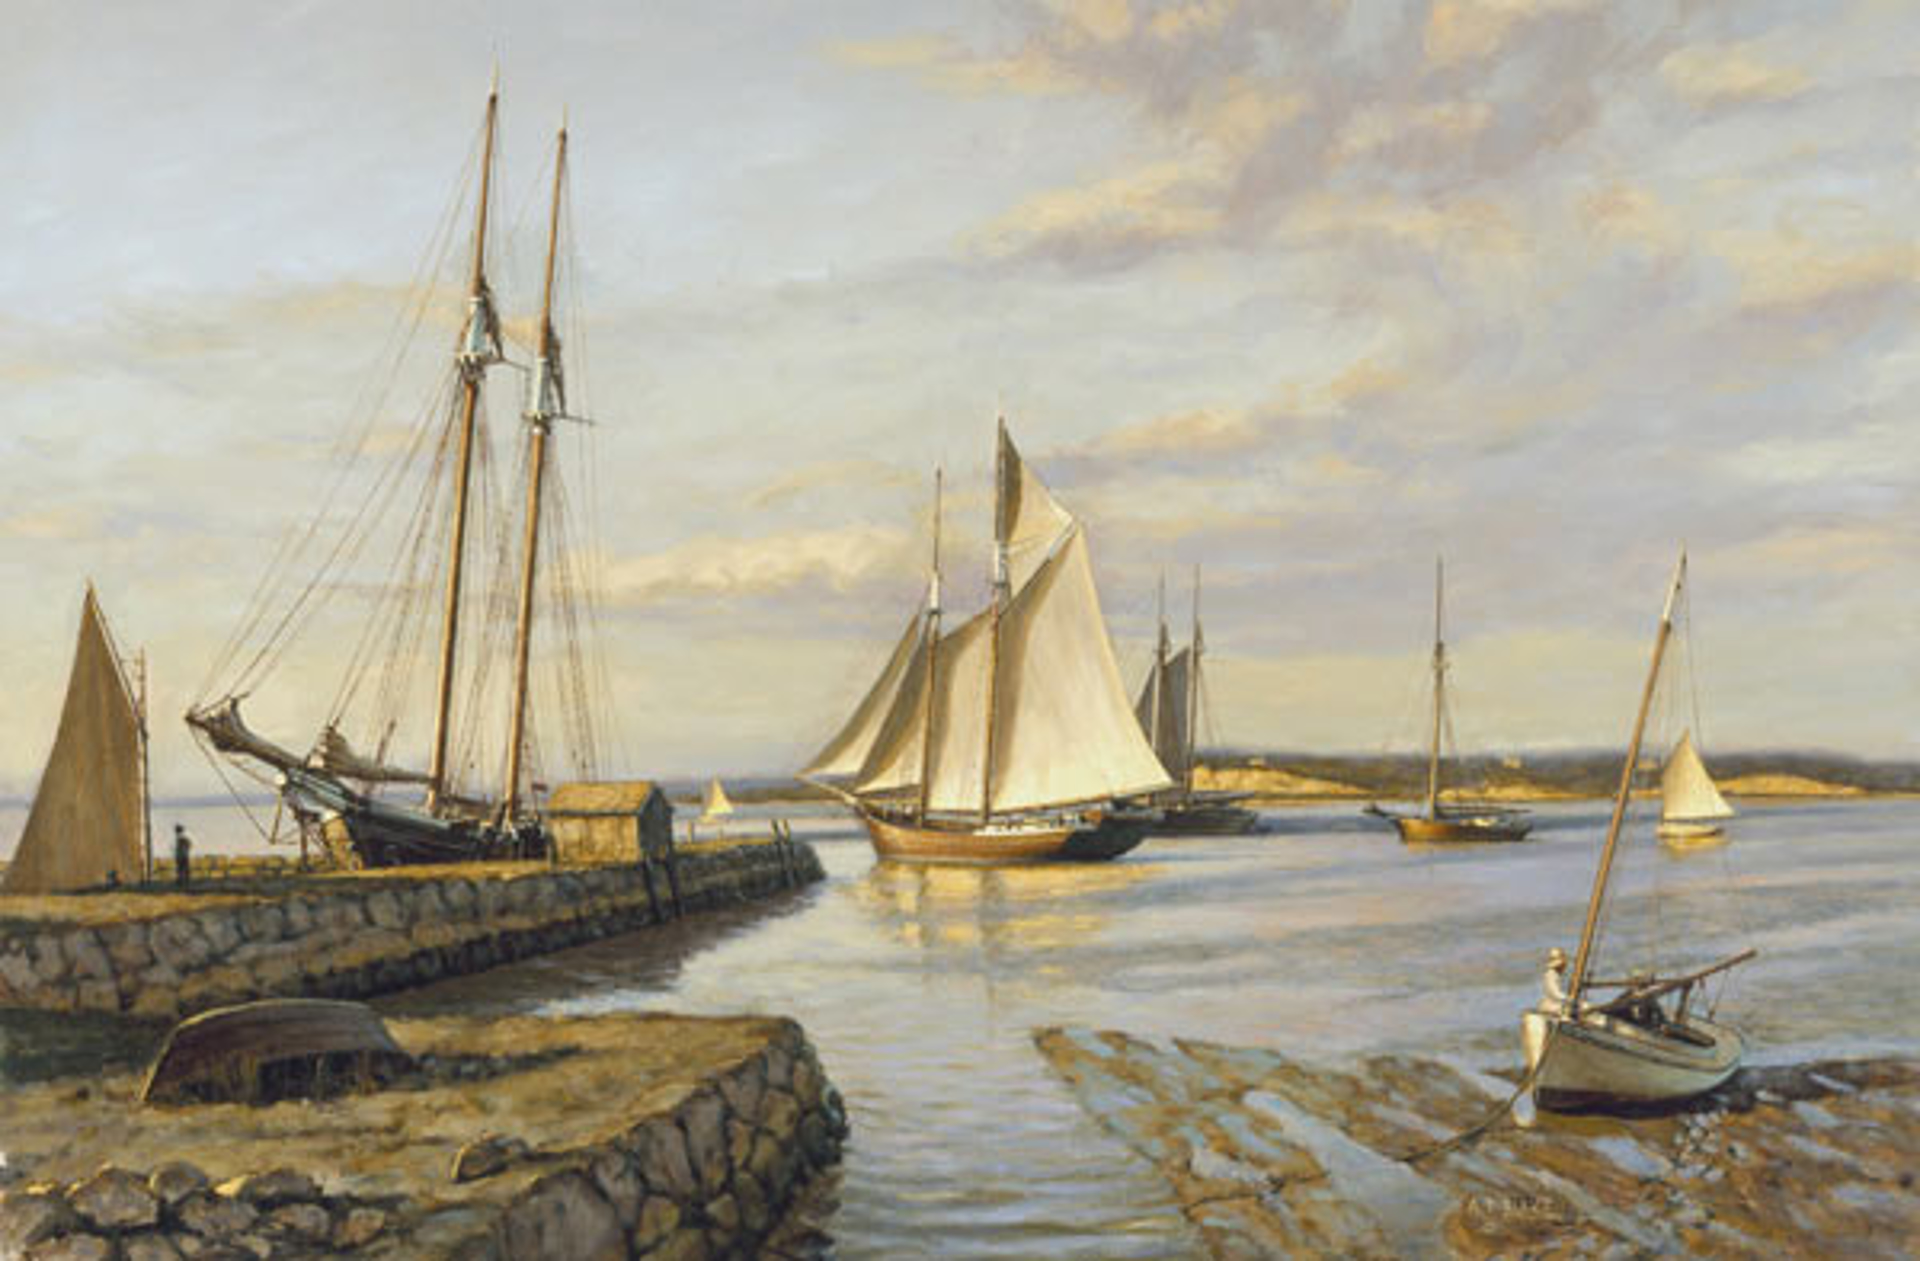 Commercial Wharf, Nantucket, Looking Over Toward Shimmo 1896 by Anthony D. Blake